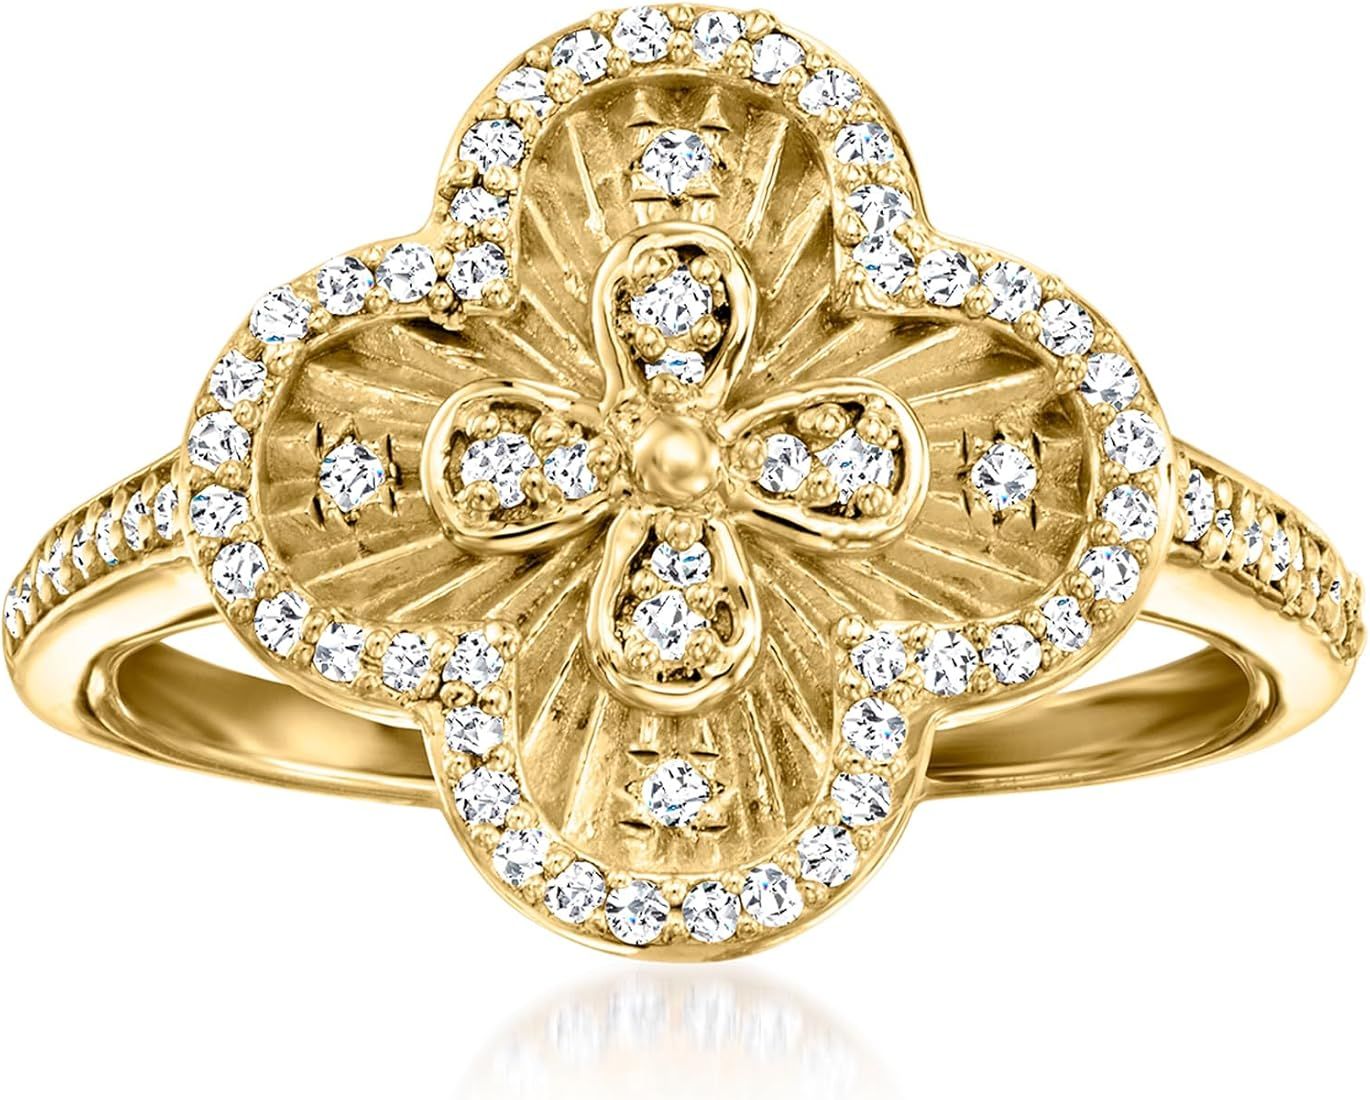 Ross-Simons 0.33 ct. t.w. Diamond Clover Ring in 18kt Gold Over Sterling | Amazon (US)